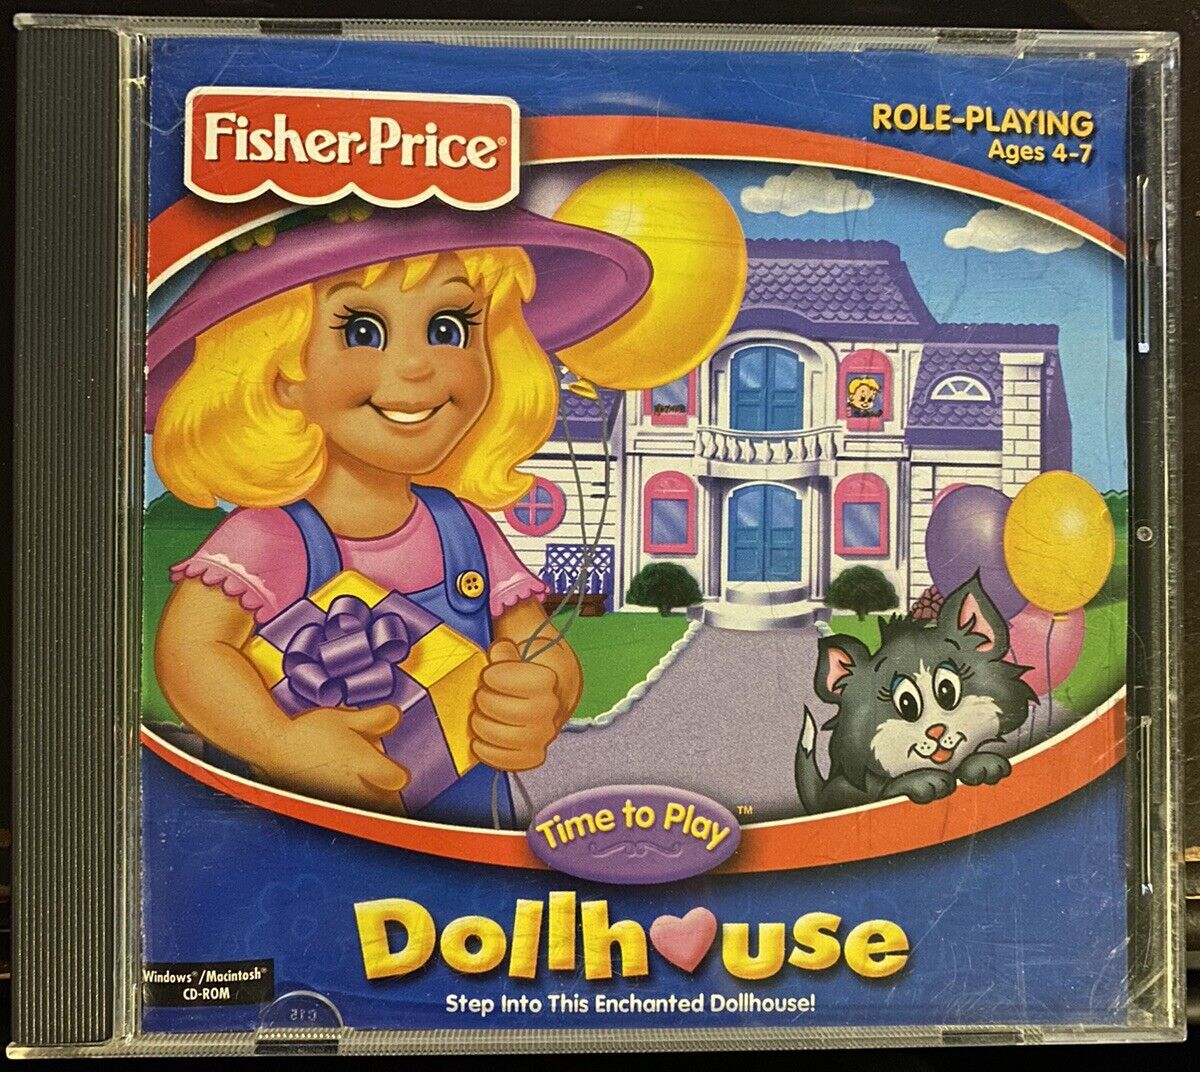 Fisher-Price Time To Play Dollhouse PC CD girl virtual doll house tea party game